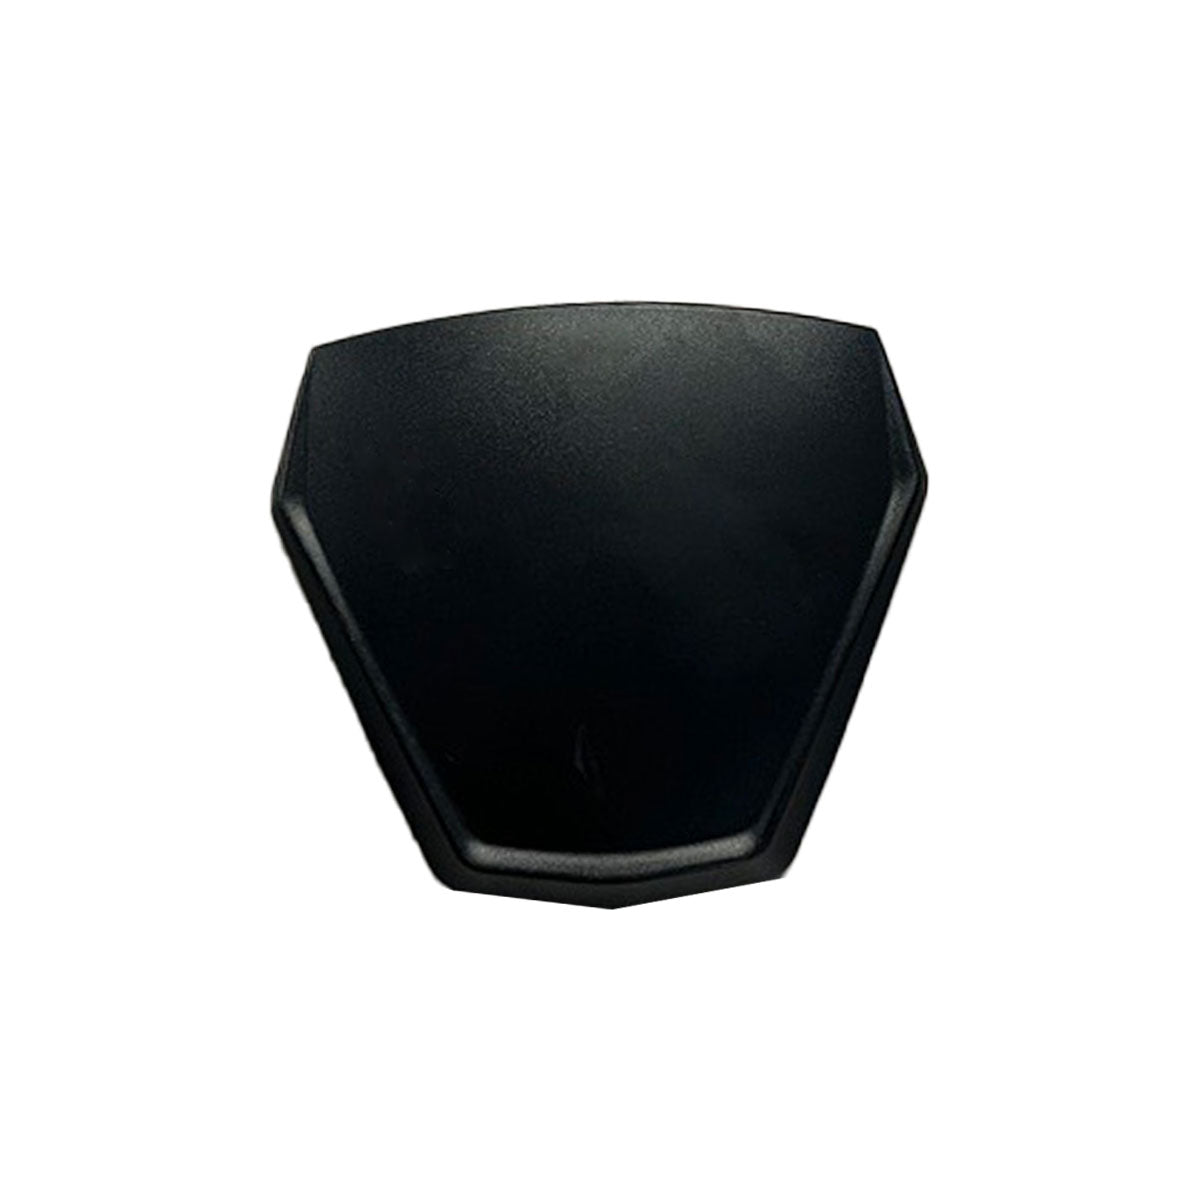 Top Vent Cover for Delta R4 Helmets